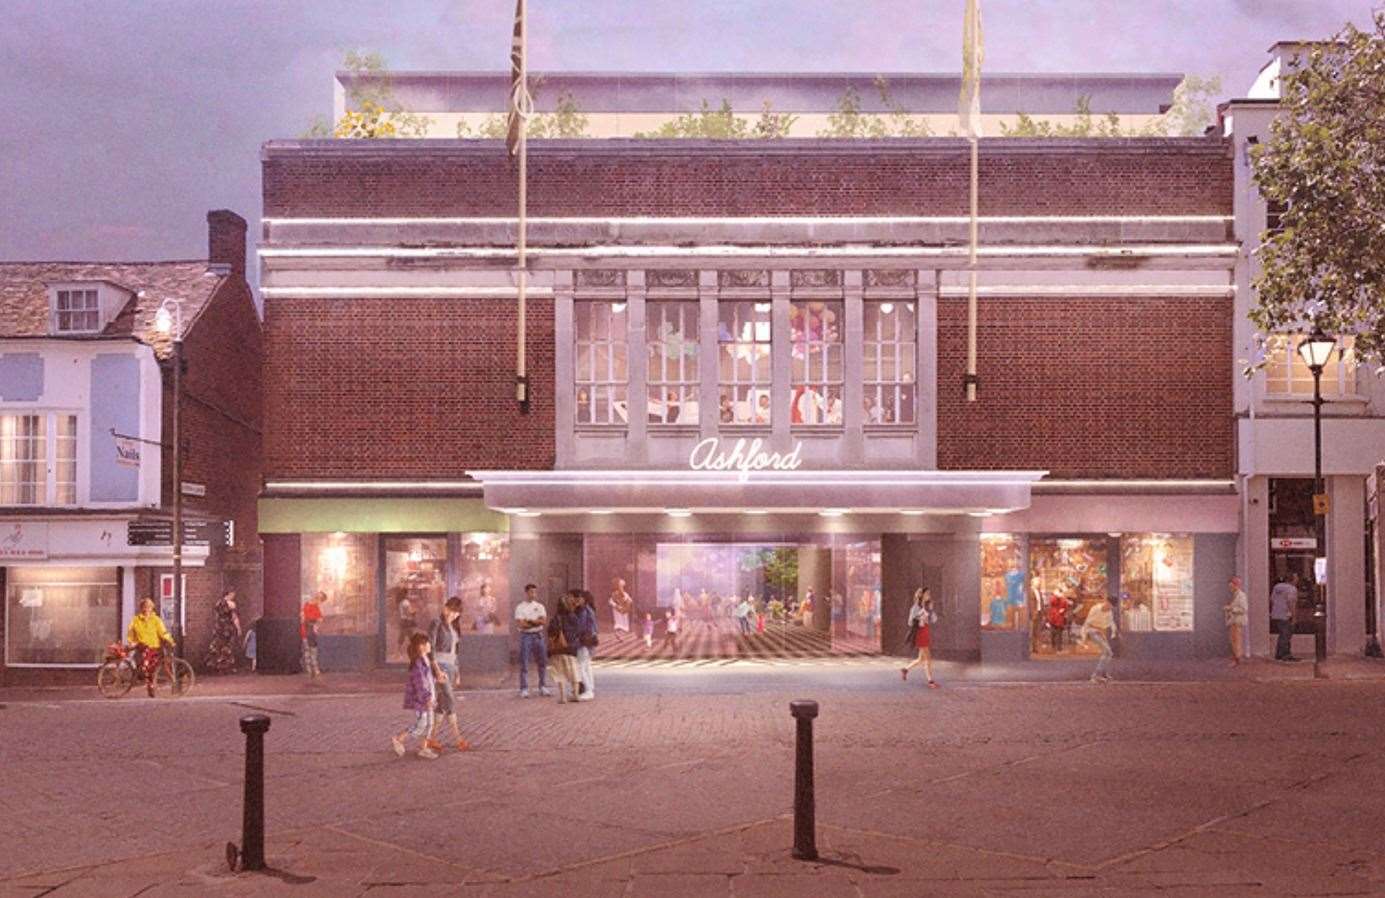 How the redevelopment of the former bingo hall could look